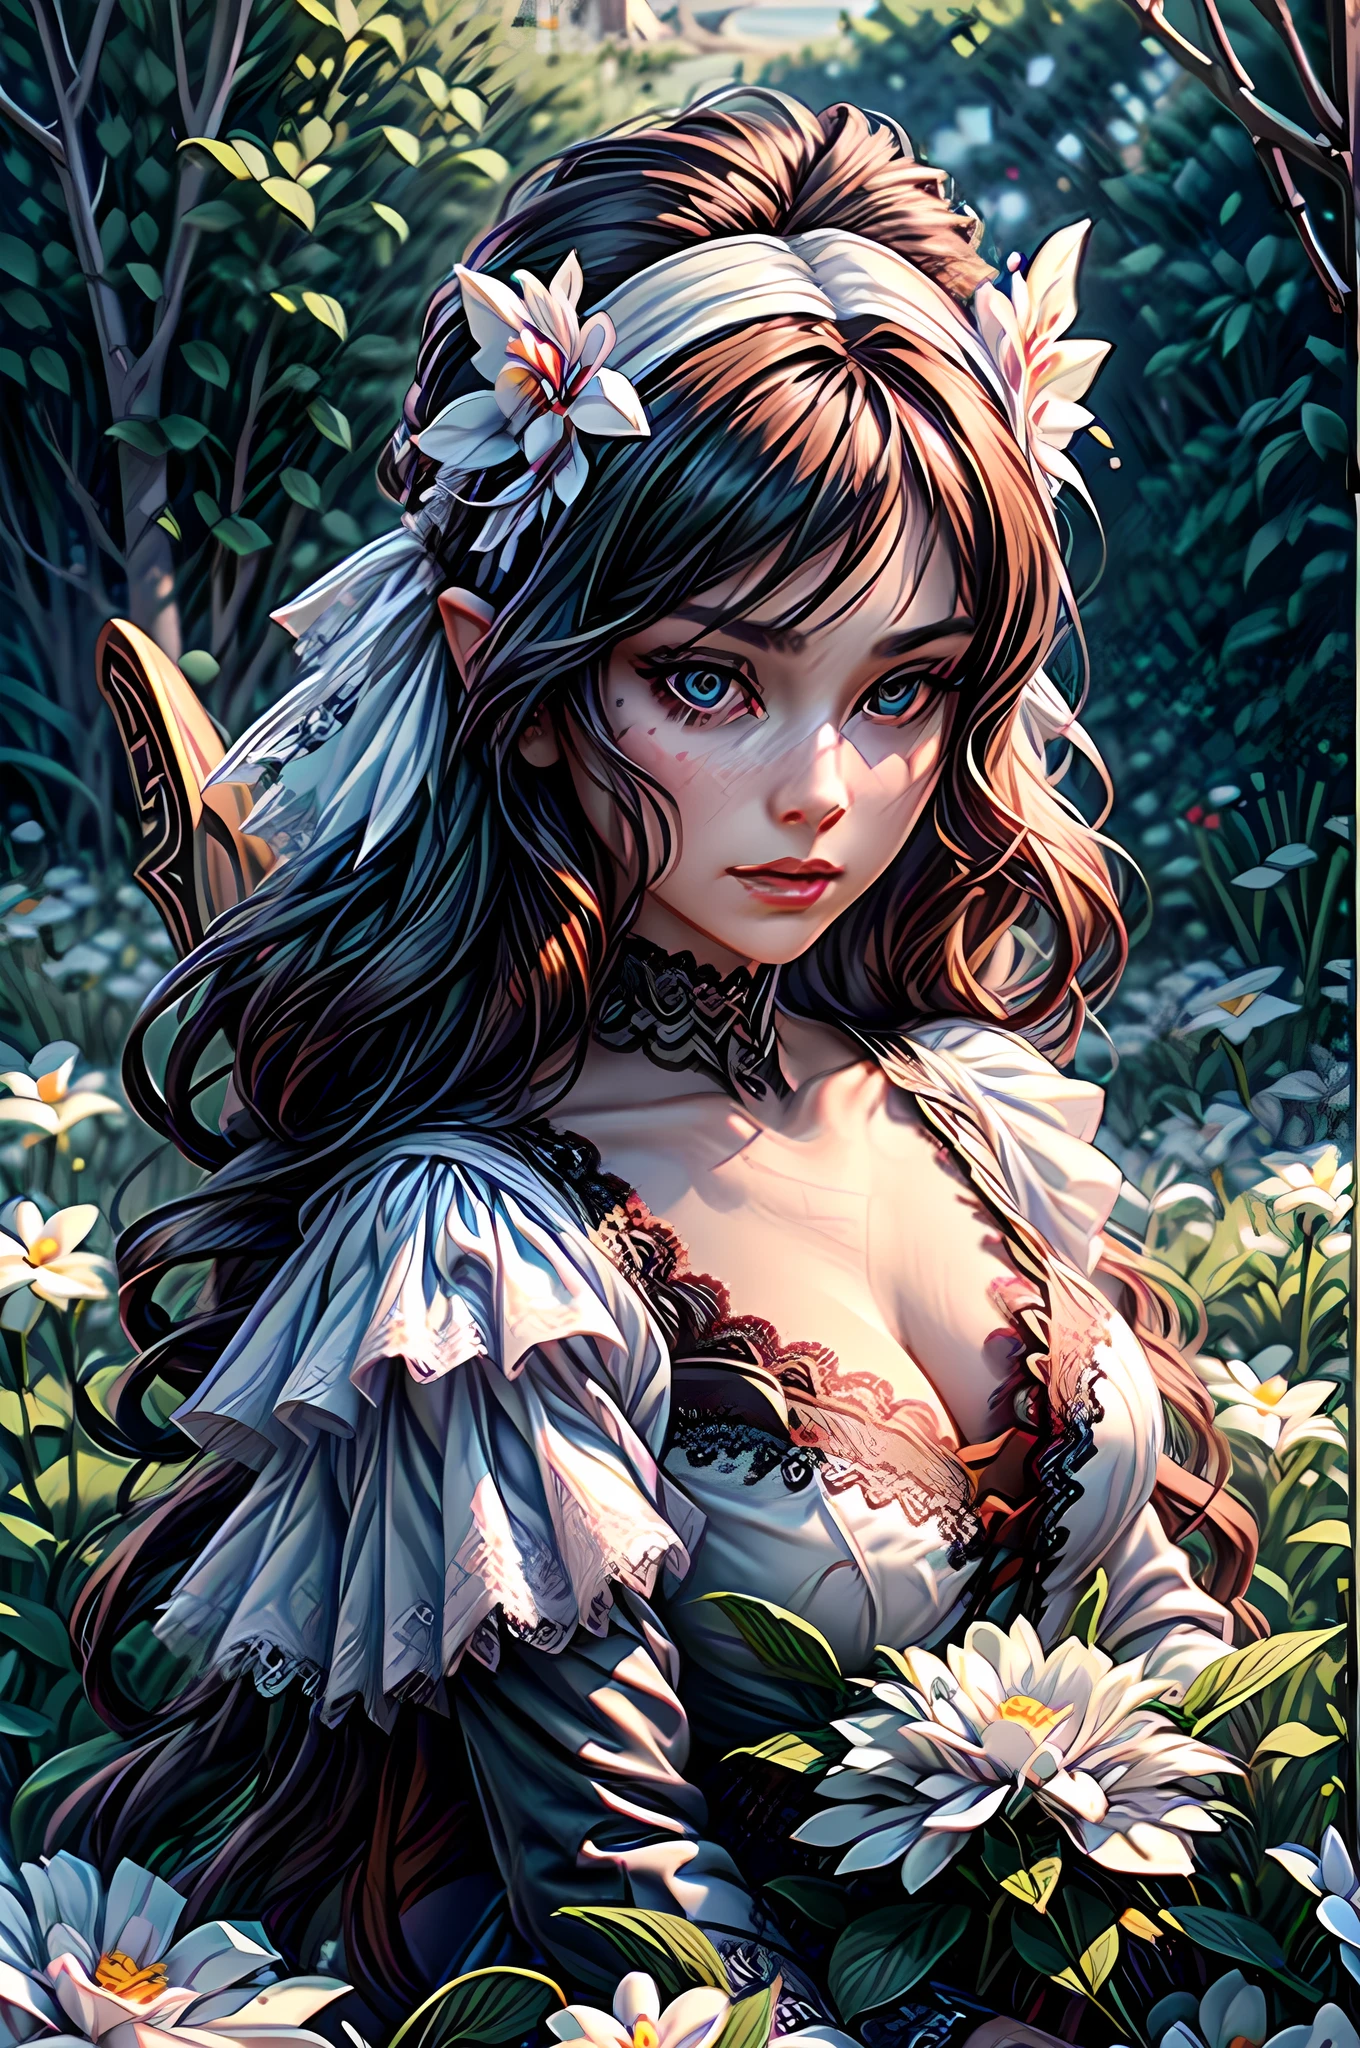 high details, best quality, 16k, RAW, [best detailed], masterpiece, best quality, (extremely detailed), full body, ultra wide shot, photorealistic, dark fantasy art, goth art, RPG art, D&D art, a picture of a dark female fairy resting in a flower meadow, extremely beautiful fairy, ultra feminine (intense details, Masterpiece, best quality), best detailed face (intense details, Masterpiece, best quality), having wide butterfly wings, spread butterfly wings (intense details, Masterpiece, best quality), dark colors wings (intense details, Masterpiece, best quality), black hair, long hair, shinning hair, flowing hair, shy smile, innocent smile, blue eyes, dark red lips, wearing ((white: 1.5)) lace dress (intense details, Masterpiece, best quality), (lace: 1.5) corset (intense details, Masterpiece, best quality), dynamic elegant shirt, chocker, wearing high heels, in dark colored flower meadow (intense details, Masterpiece, best quality), (red flowers: 1.2) , (black flowers: 1.2), (white flowers: 1.2), (blue flowers: 1.3) [extreme many flowers] (intense details, Masterpiece, best quality), dark colorful flowers (intense details, Masterpiece, best quality), flower meadow in a dark goth field background, dim light, cinematic light, High Detail, Ultra High Quality, High Resolution, 16K Resolution, Ultra HD Pictures, 3D rendering Ultra Realistic, Clear Details, Realistic Detail, Ultra High Definition, DonMF41ryW1ng5XL